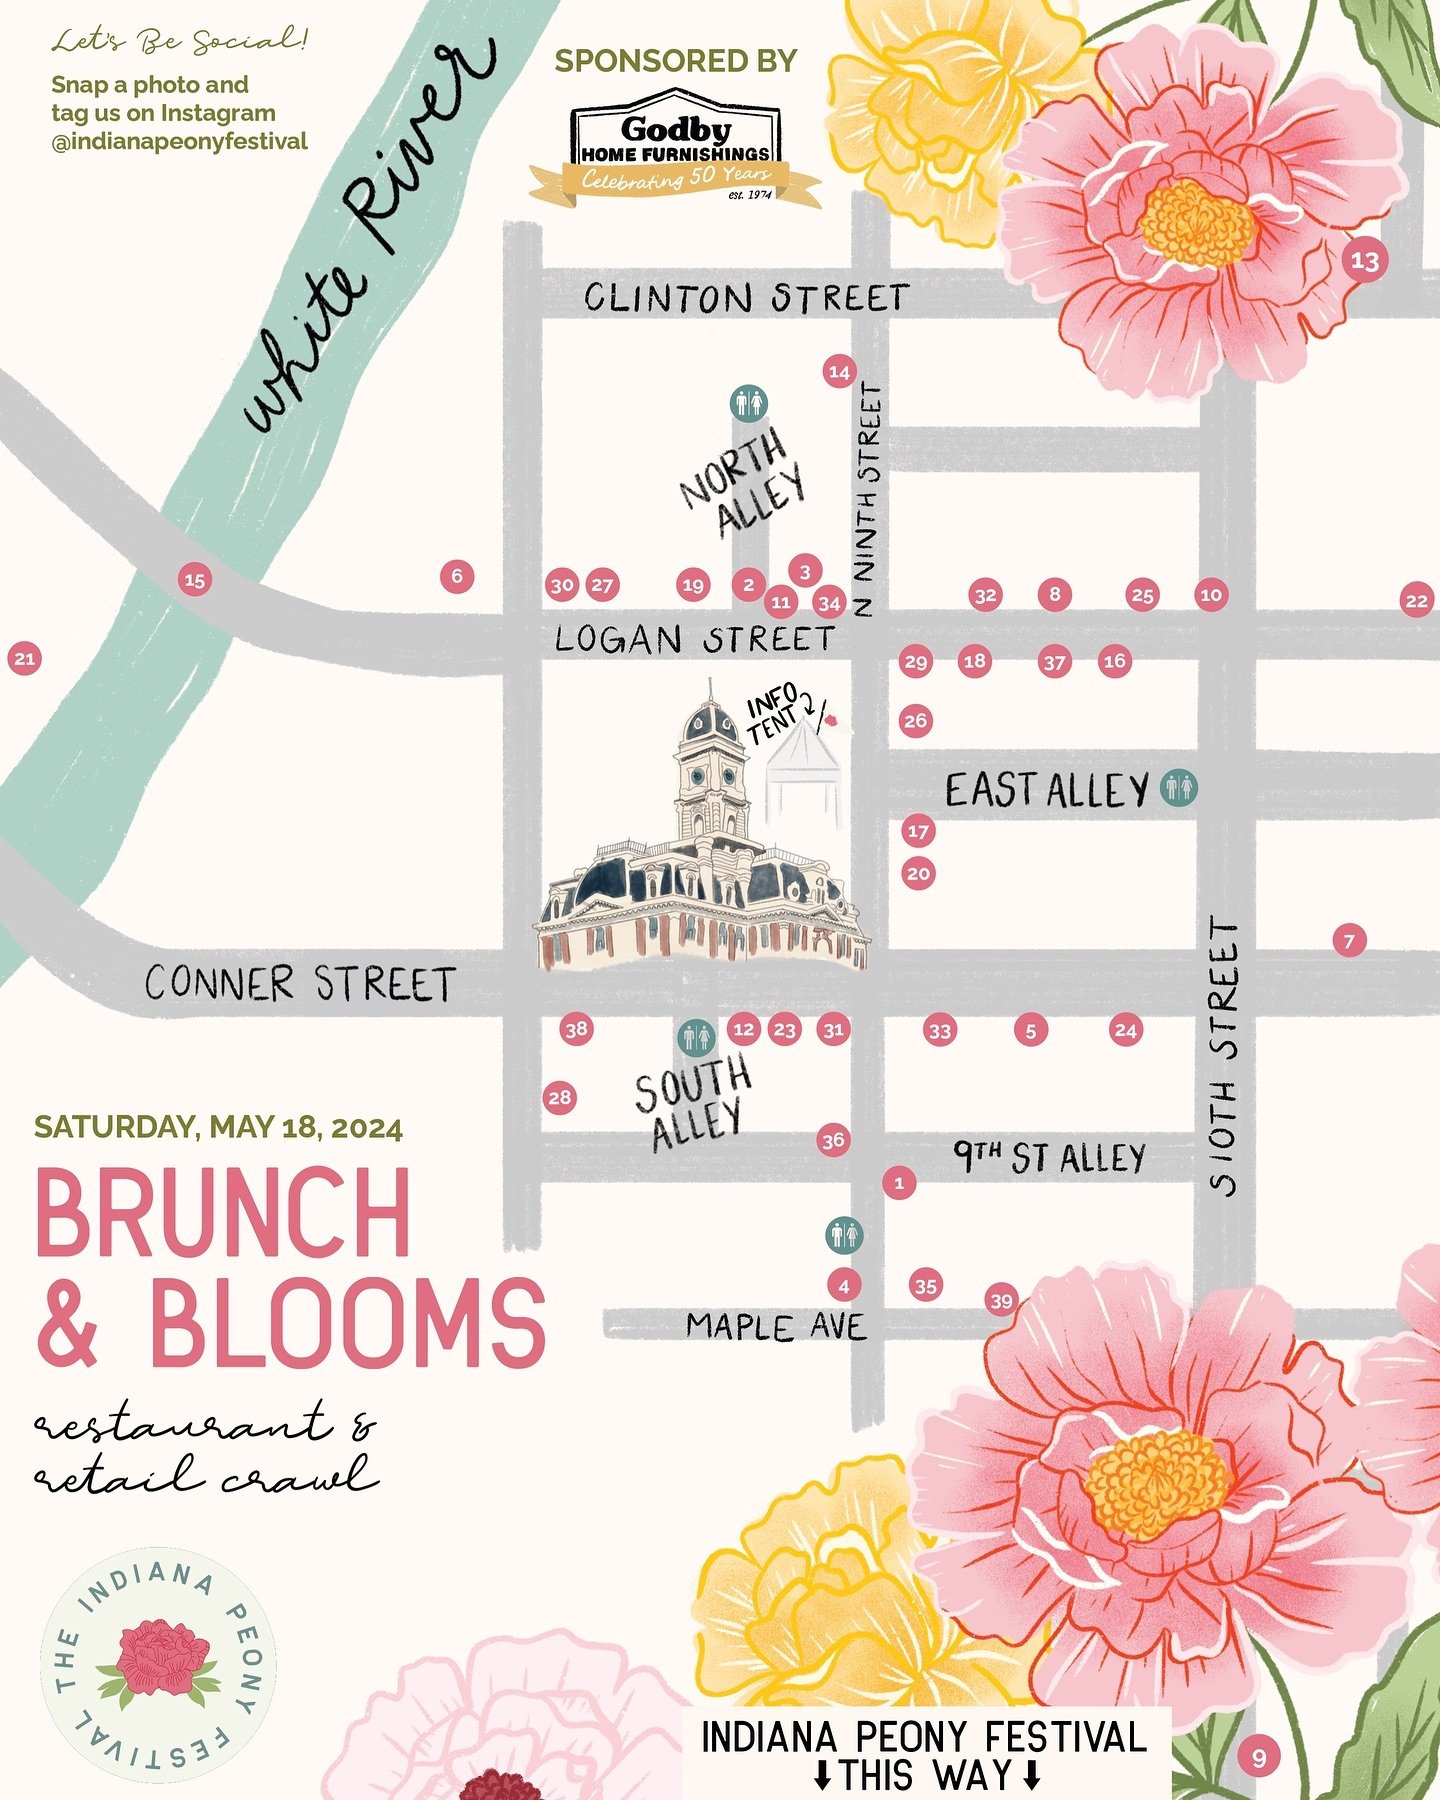 The fun doesn&rsquo;t end in Seminary Park! Just steps from the park, visit these 40 brunch &amp; retail shops Downtown Noblesville who are participating in this year&rsquo;s Brunch &amp; Blooms event on the square. Join them for peony inspired food,